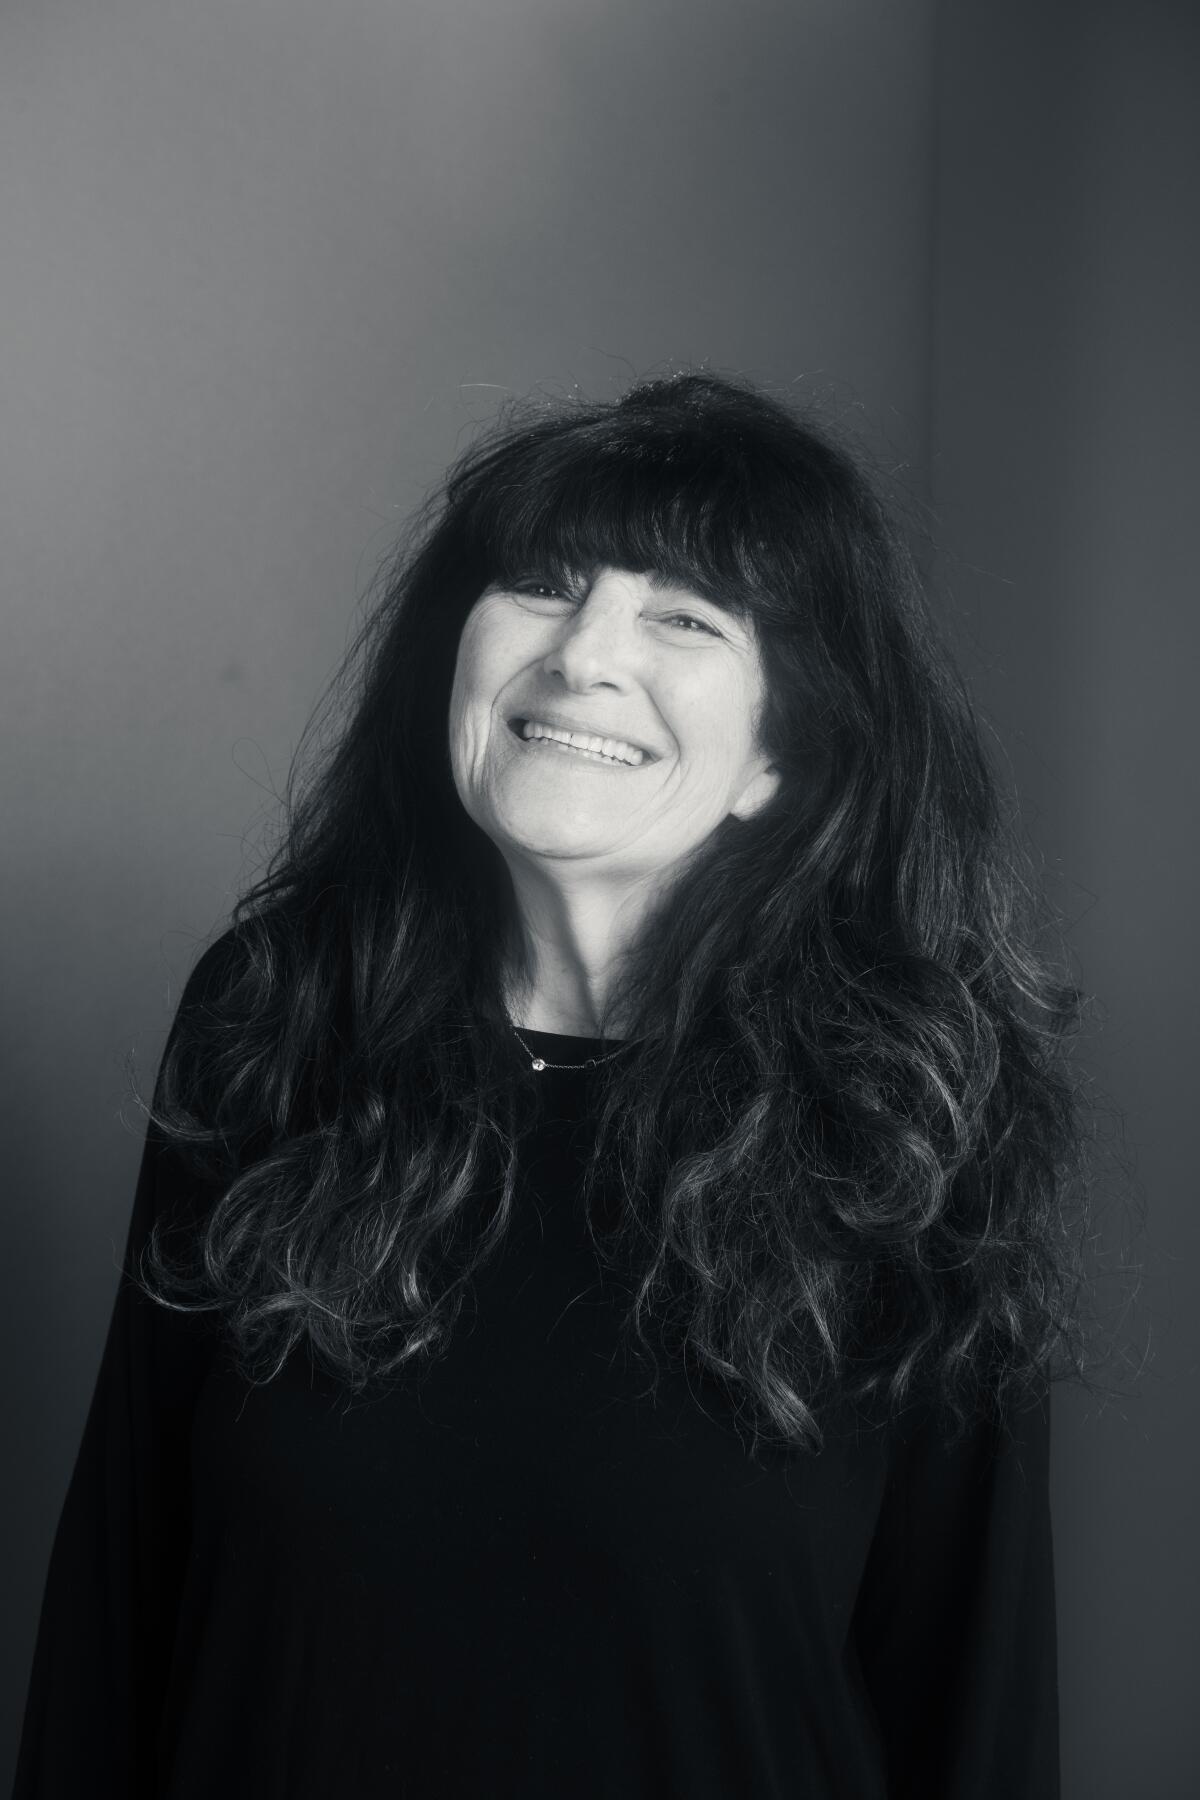 A vertical portrait of Ruth Reichl, photographed smiling and in black and white.